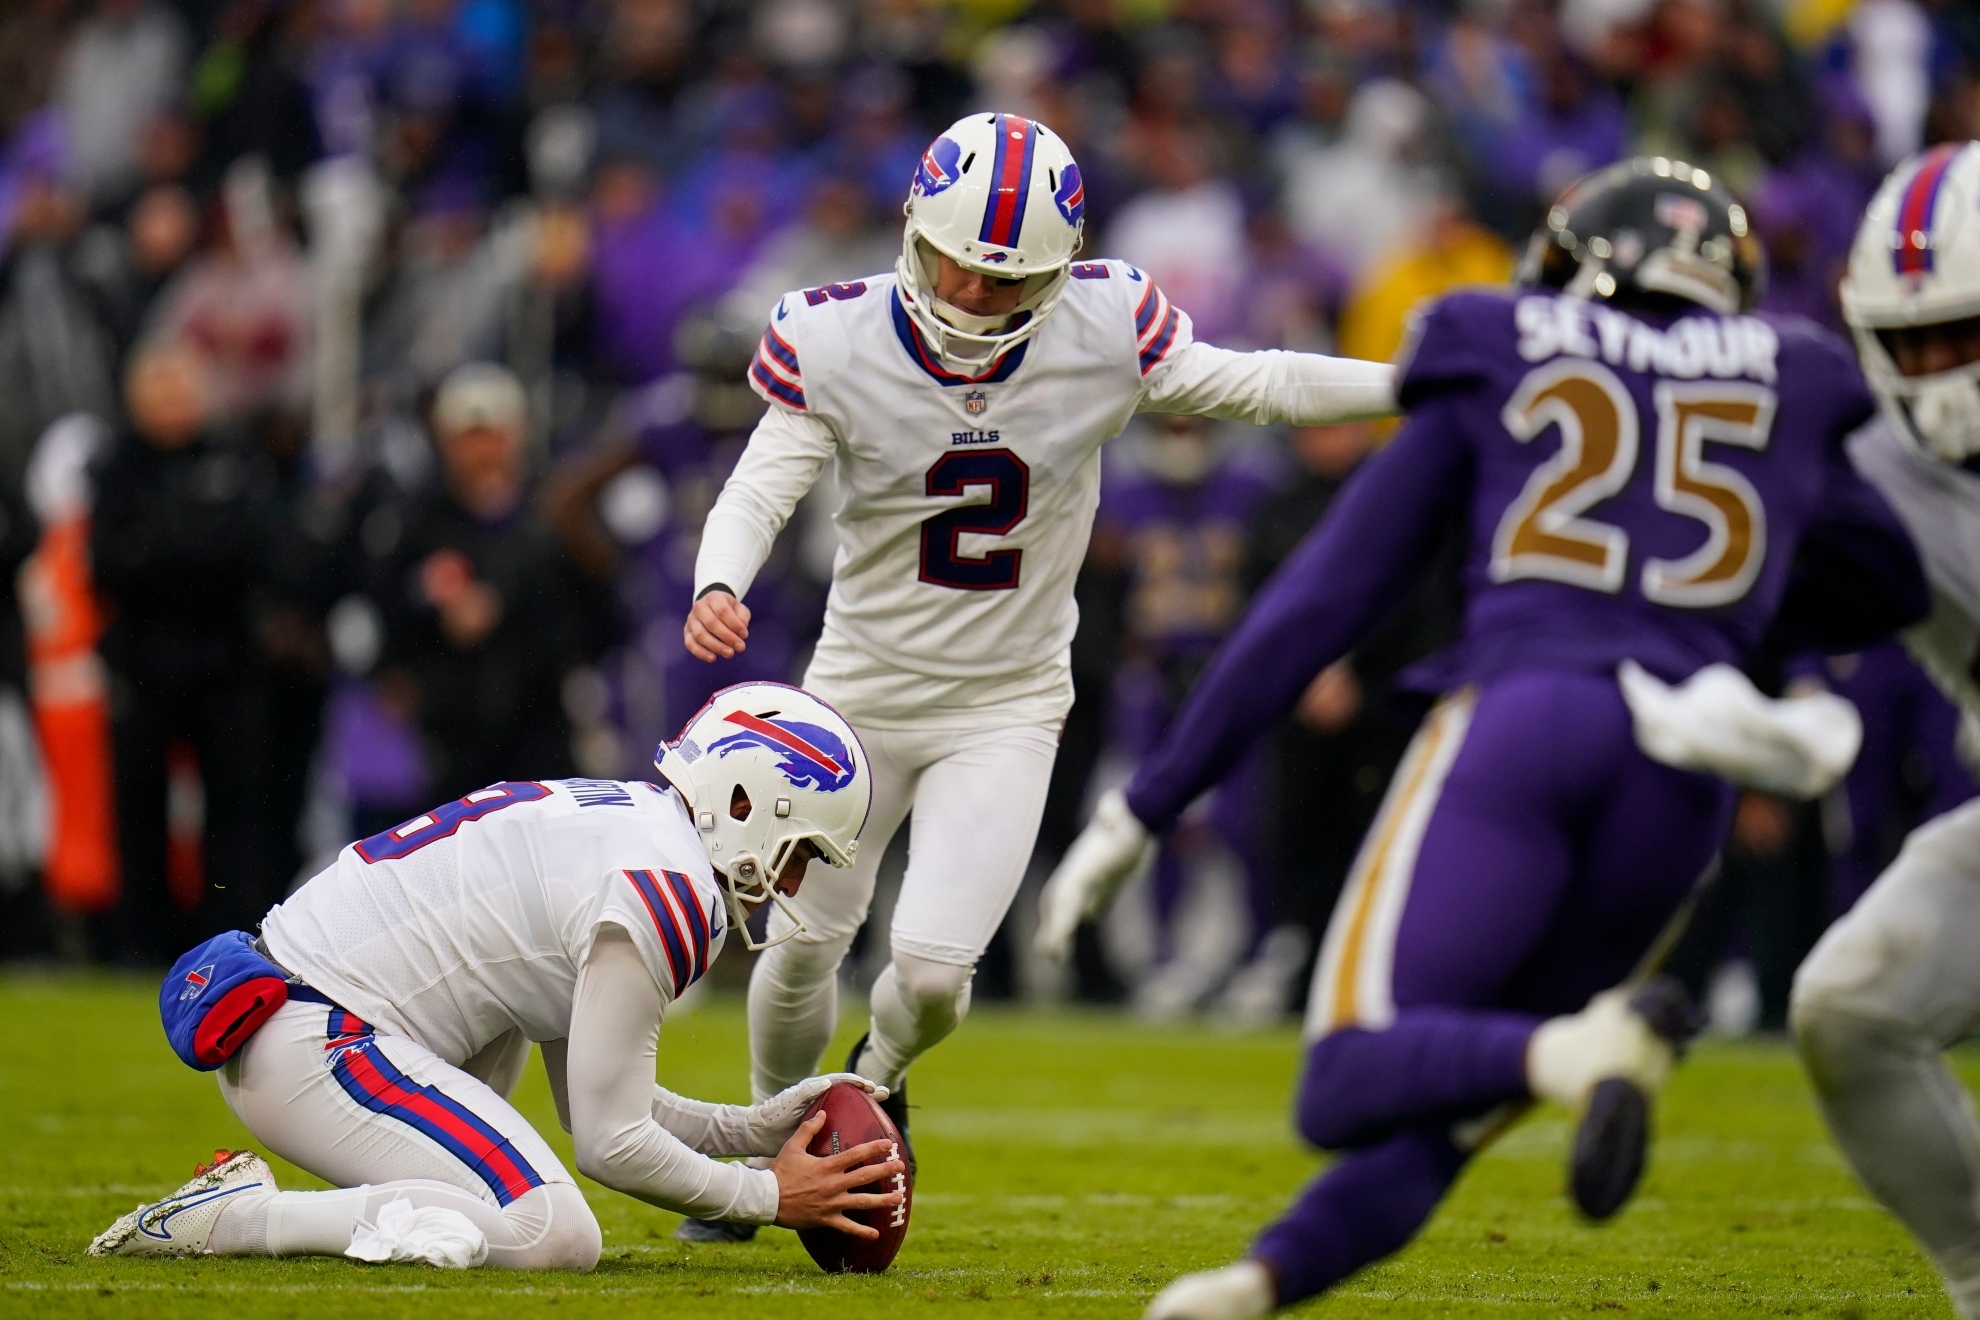 Buffalo Bills place kicker Tyler Bass (2) kicks a 21-yard field goal on the final play of the fourth quarter to give the Bills a 23-20 win over the Baltimore Ravens in an NFL football game Sunday, Oct. 2, 2022, in Baltimore / AP